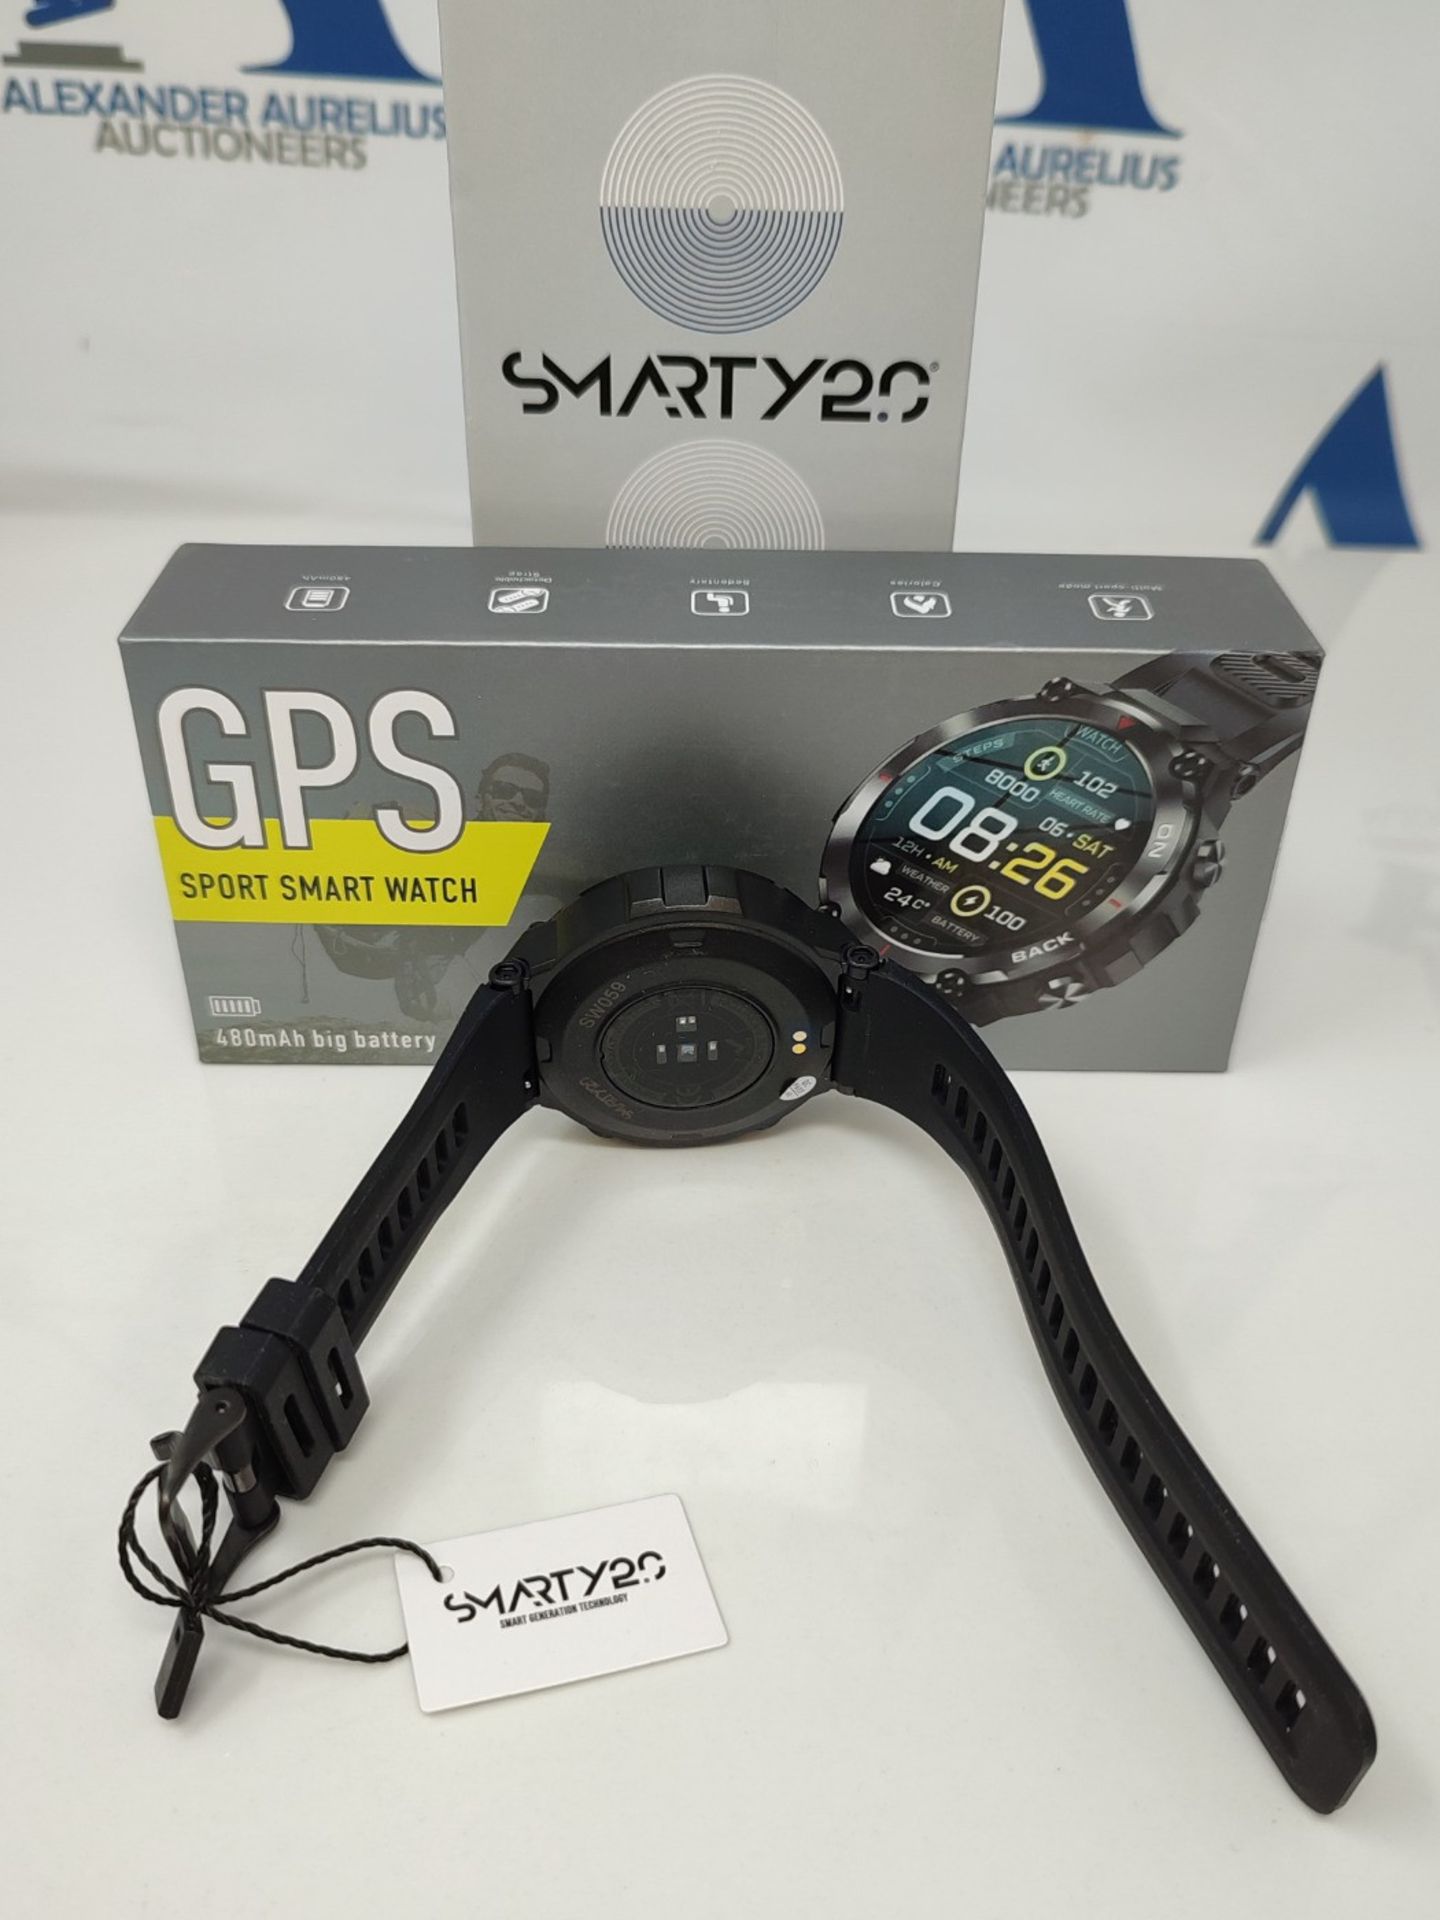 RRP £138.00 SMARTY2.0 - Smartwatch SW059A - Black Color - Optimized GPS, High Efficiency Battery, - Image 3 of 3